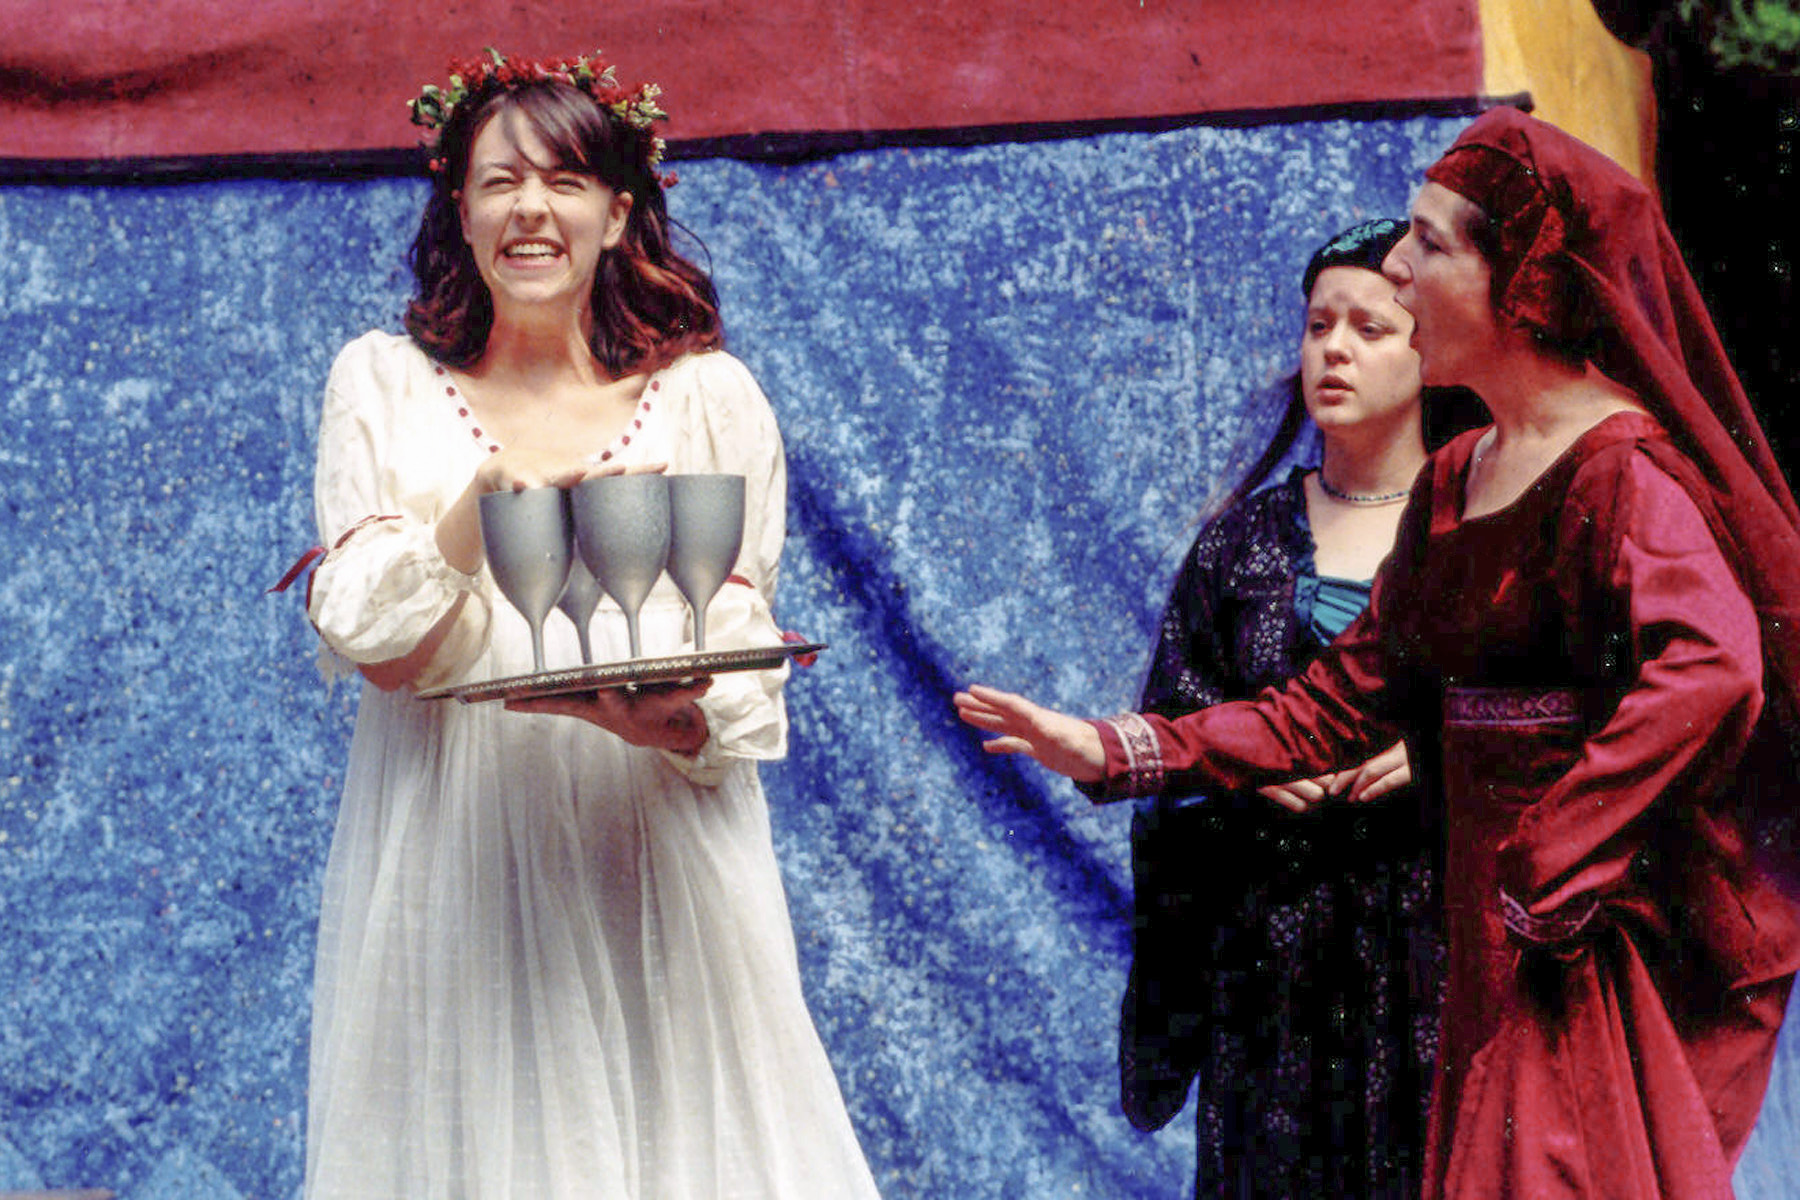 Jennifer Marley, Esther Williamson and Erin Day in The Merry Wives of Windsor - 2003